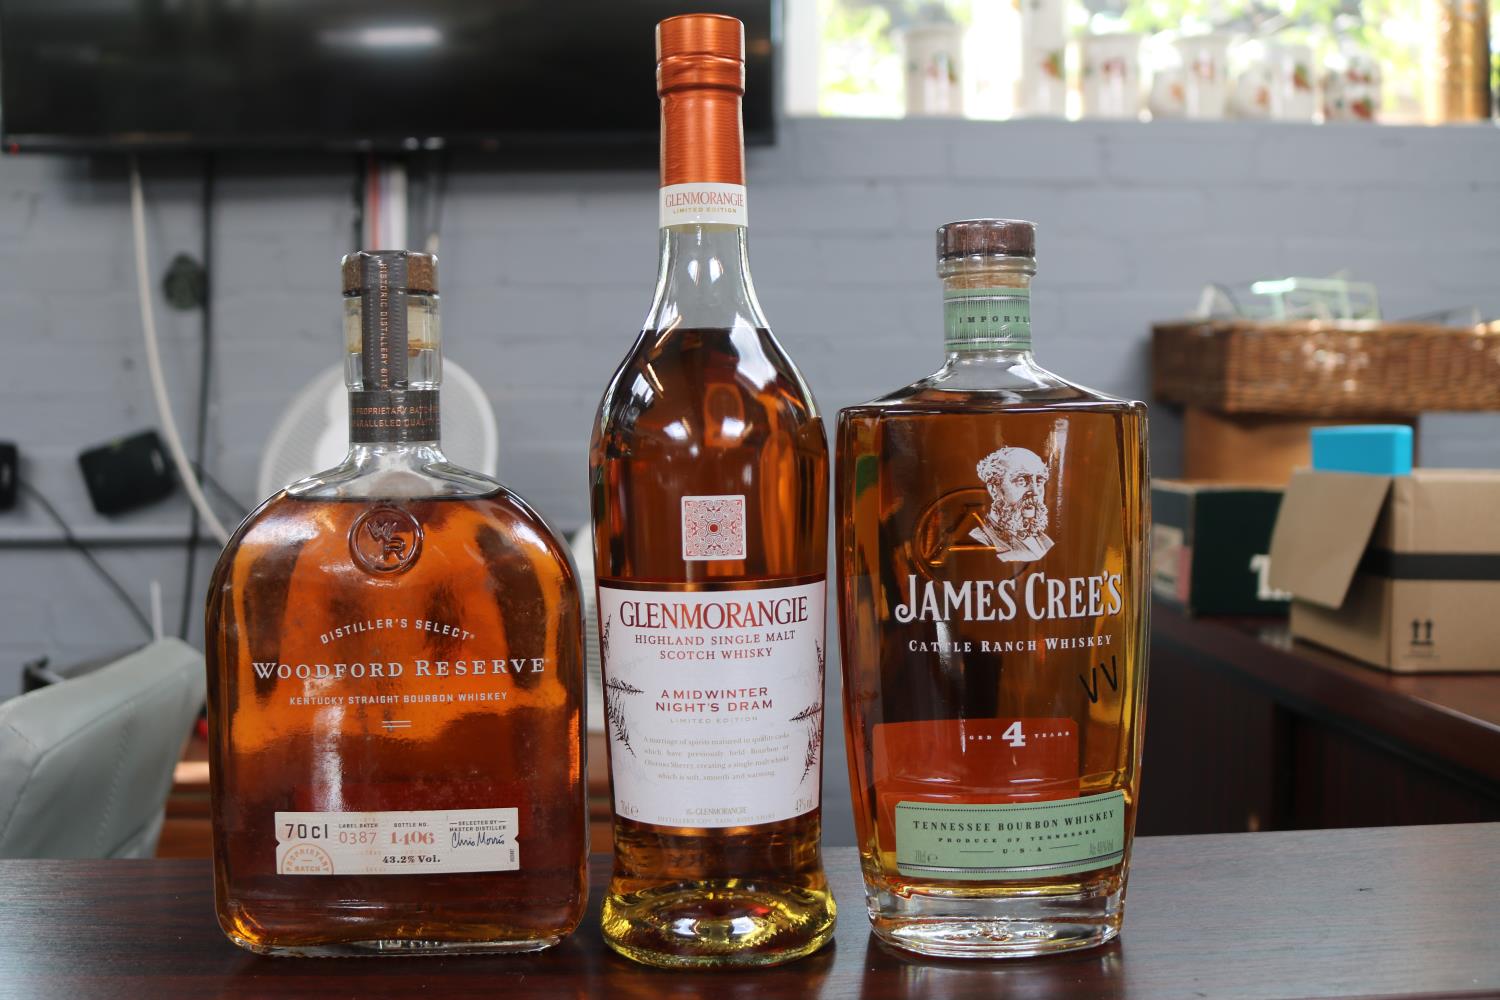 Glenmorangie A Midwinter Nights Dram Limited edition 70cl, James Cree's Cattle Ranch Whiskey 70cl